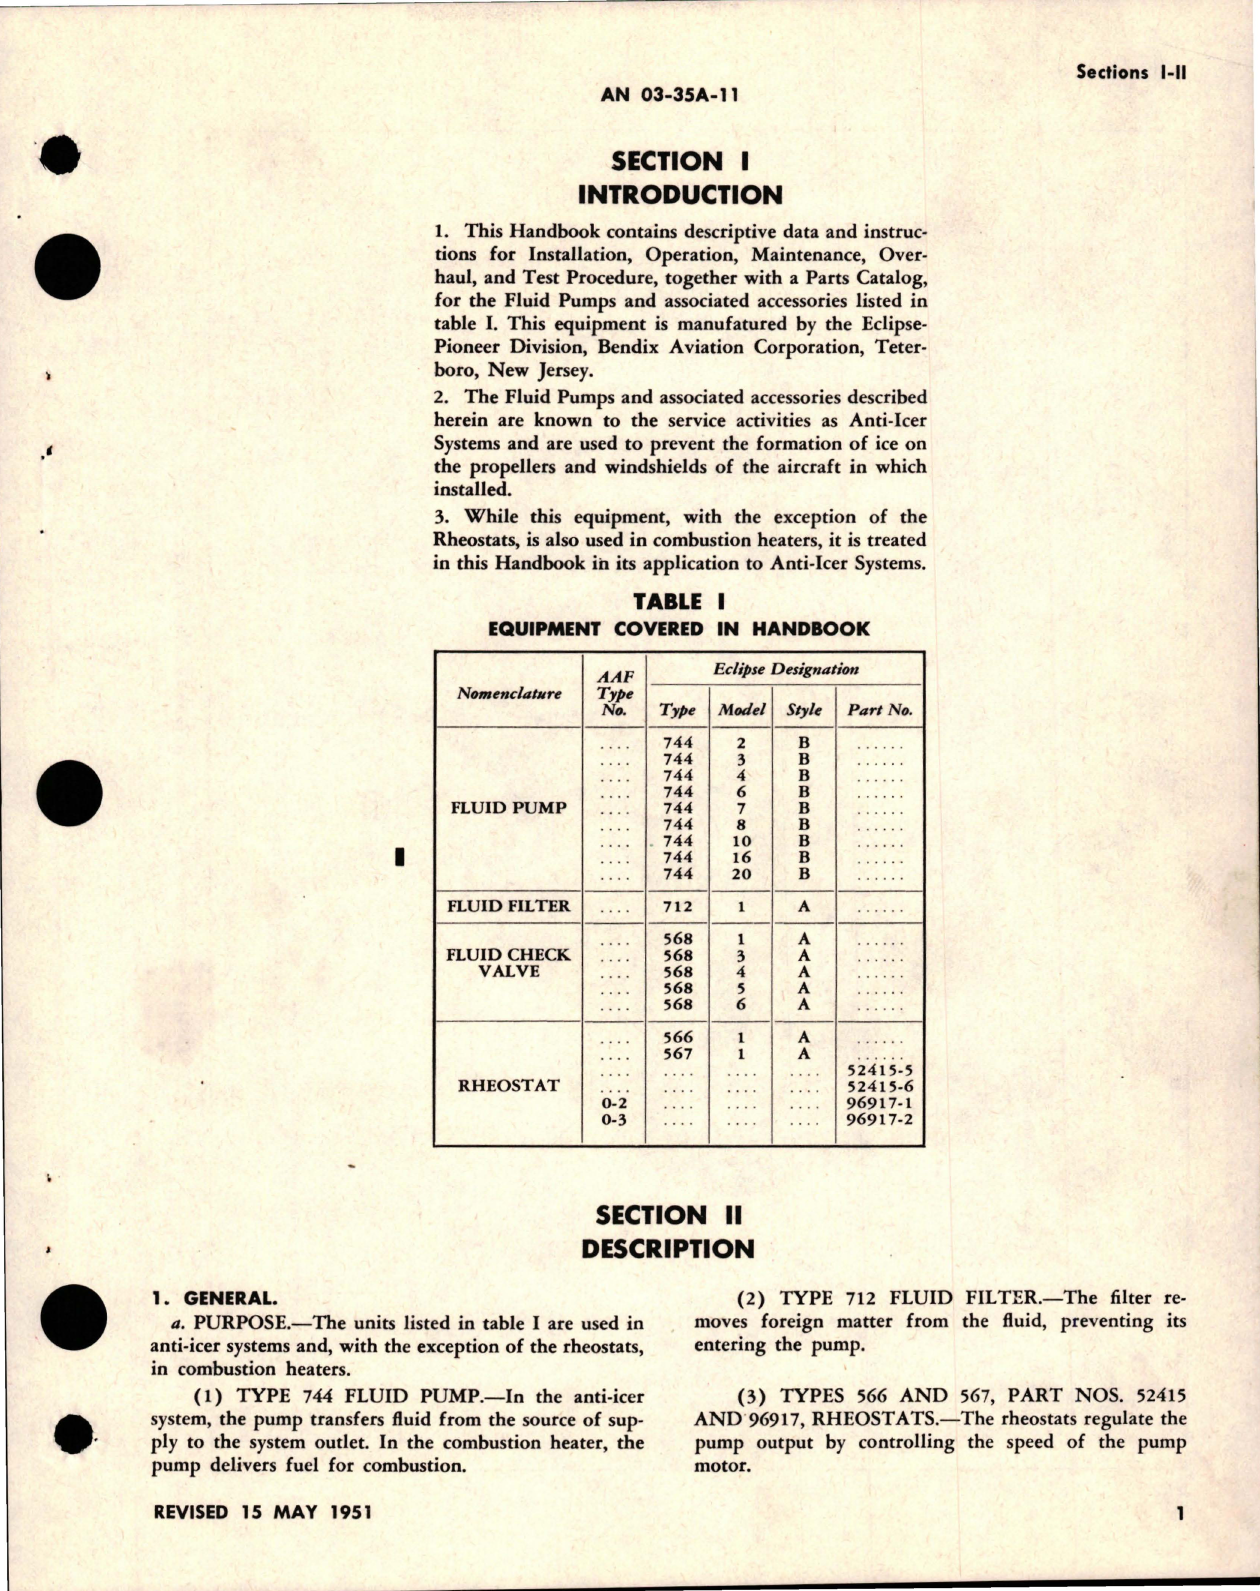 Sample page 7 from AirCorps Library document: Operation, Service and Overhaul Instructions with Parts Catalog for Propeller and Windshield Anti-Icer Pumps - Type 744